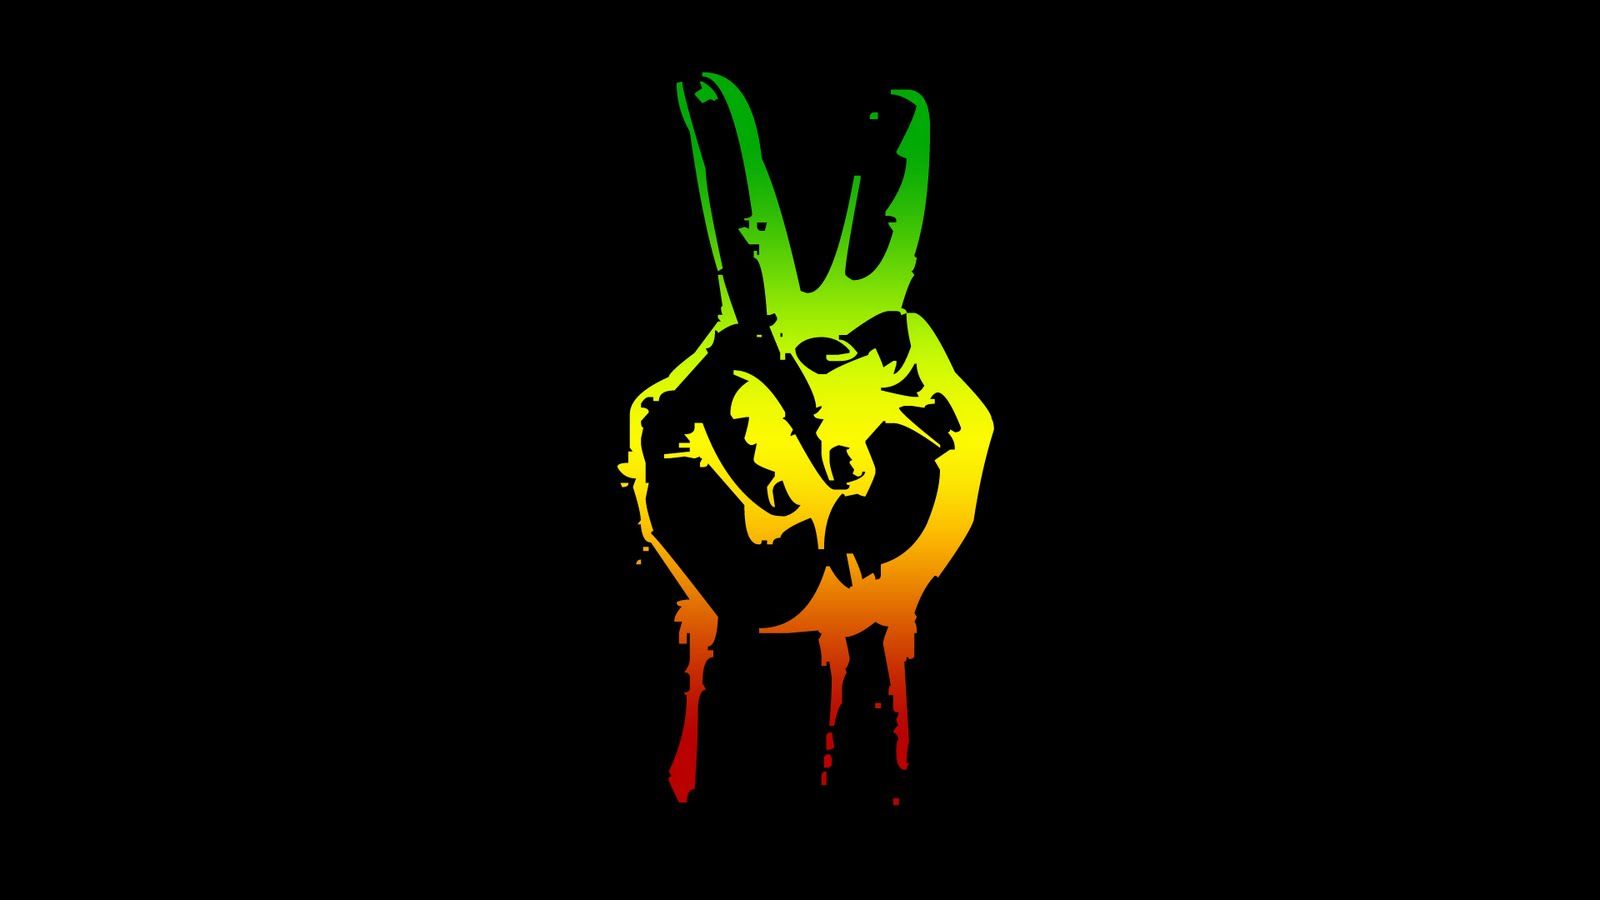 Rasta HD Wallpaper - HD Wallpapers Backgrounds of Your Choice